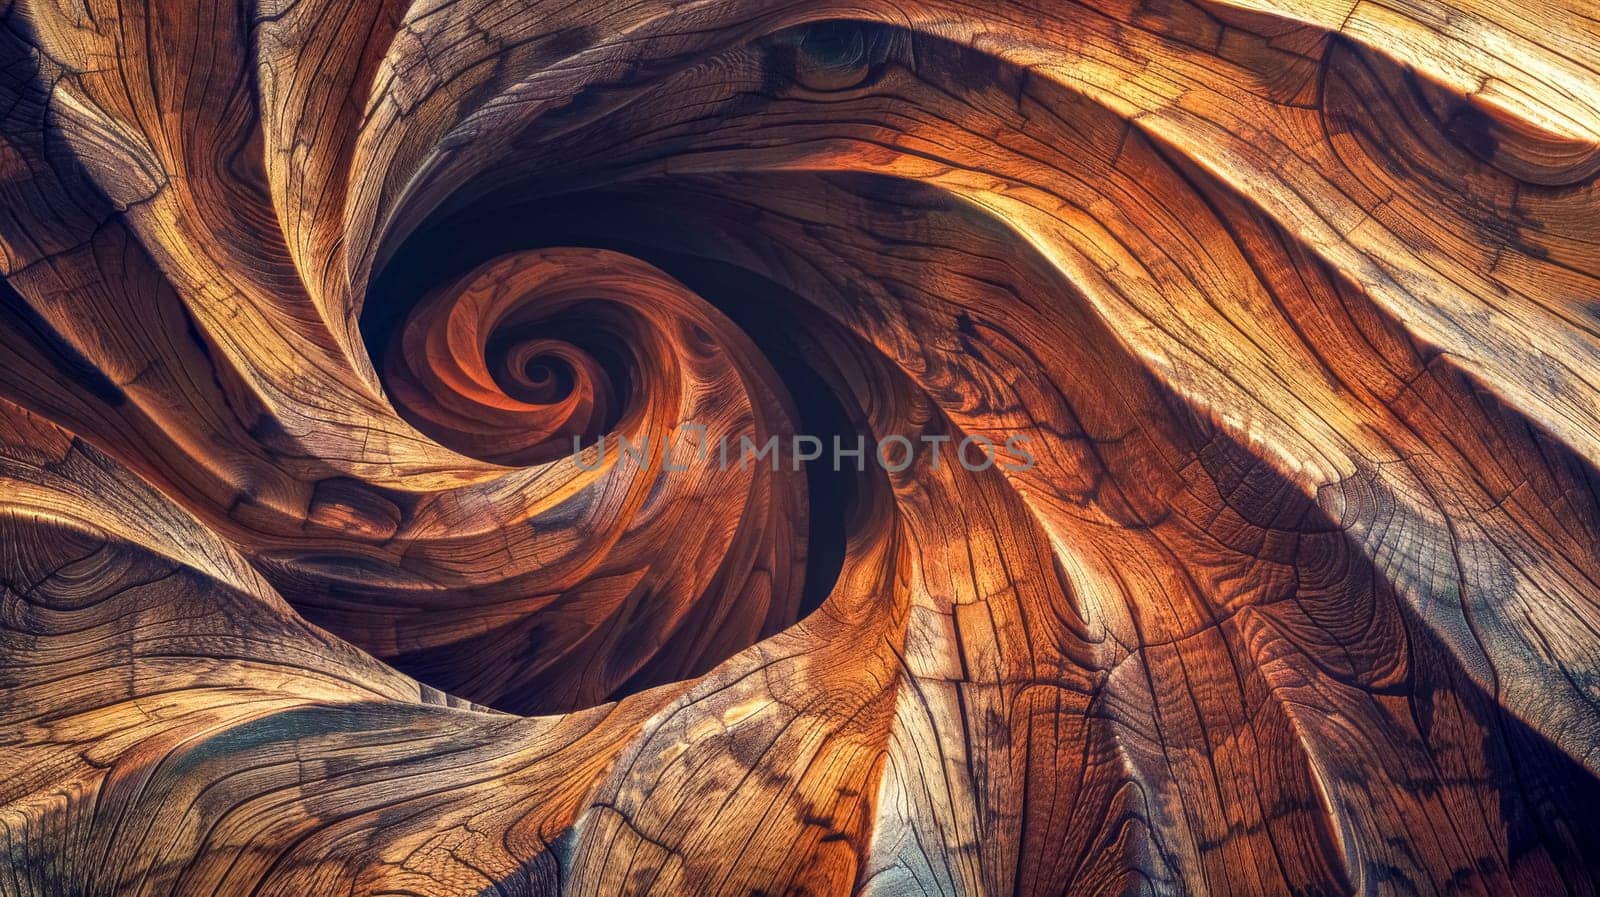 Whirling wooden textures – abstract art by Edophoto